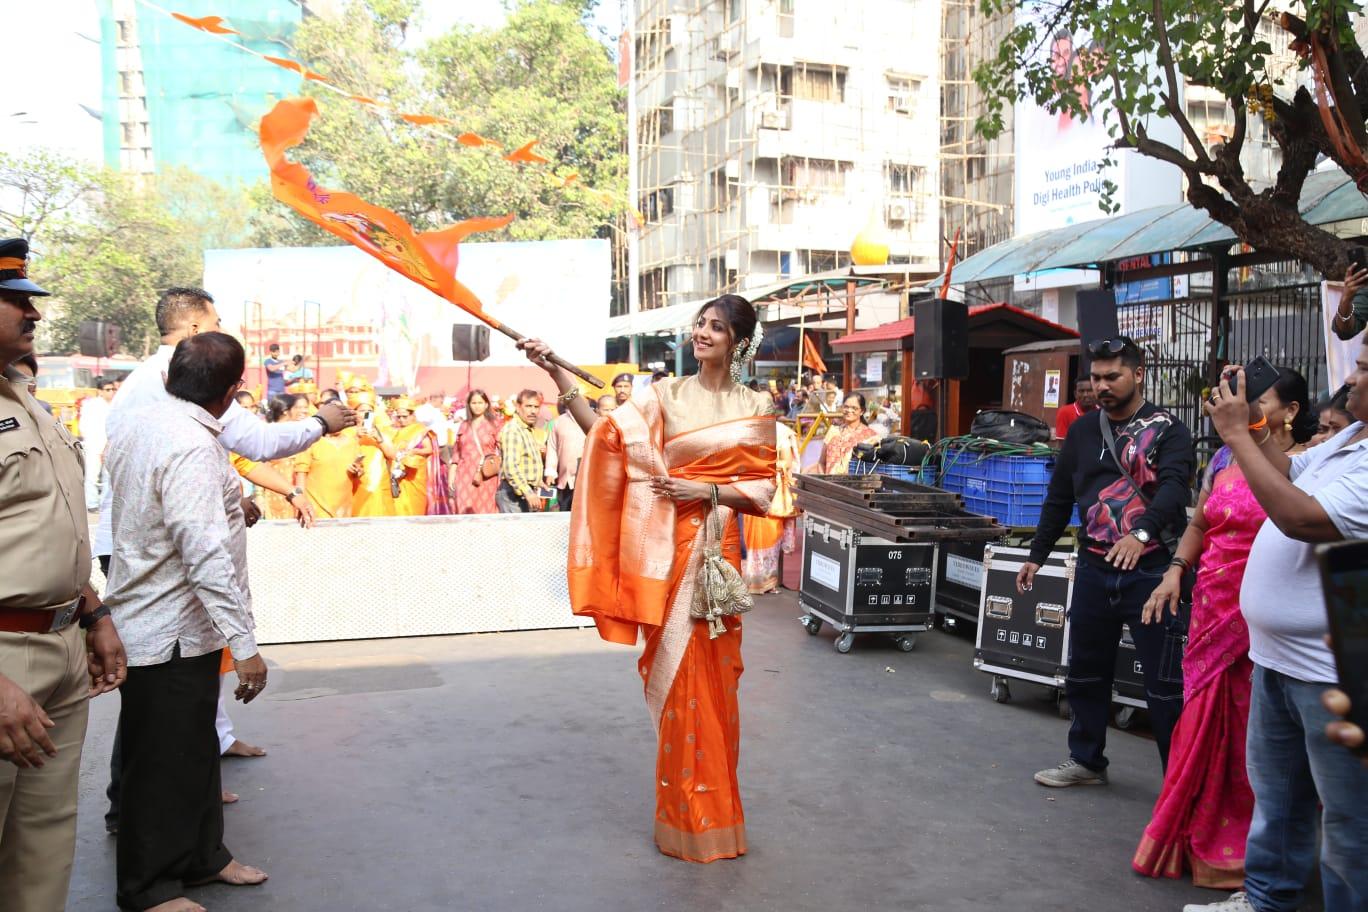 Shilpa Shetty visited Siddhivinayak temple and waved an orange flag with the image of lord ram and Jai Shri Ram written on it